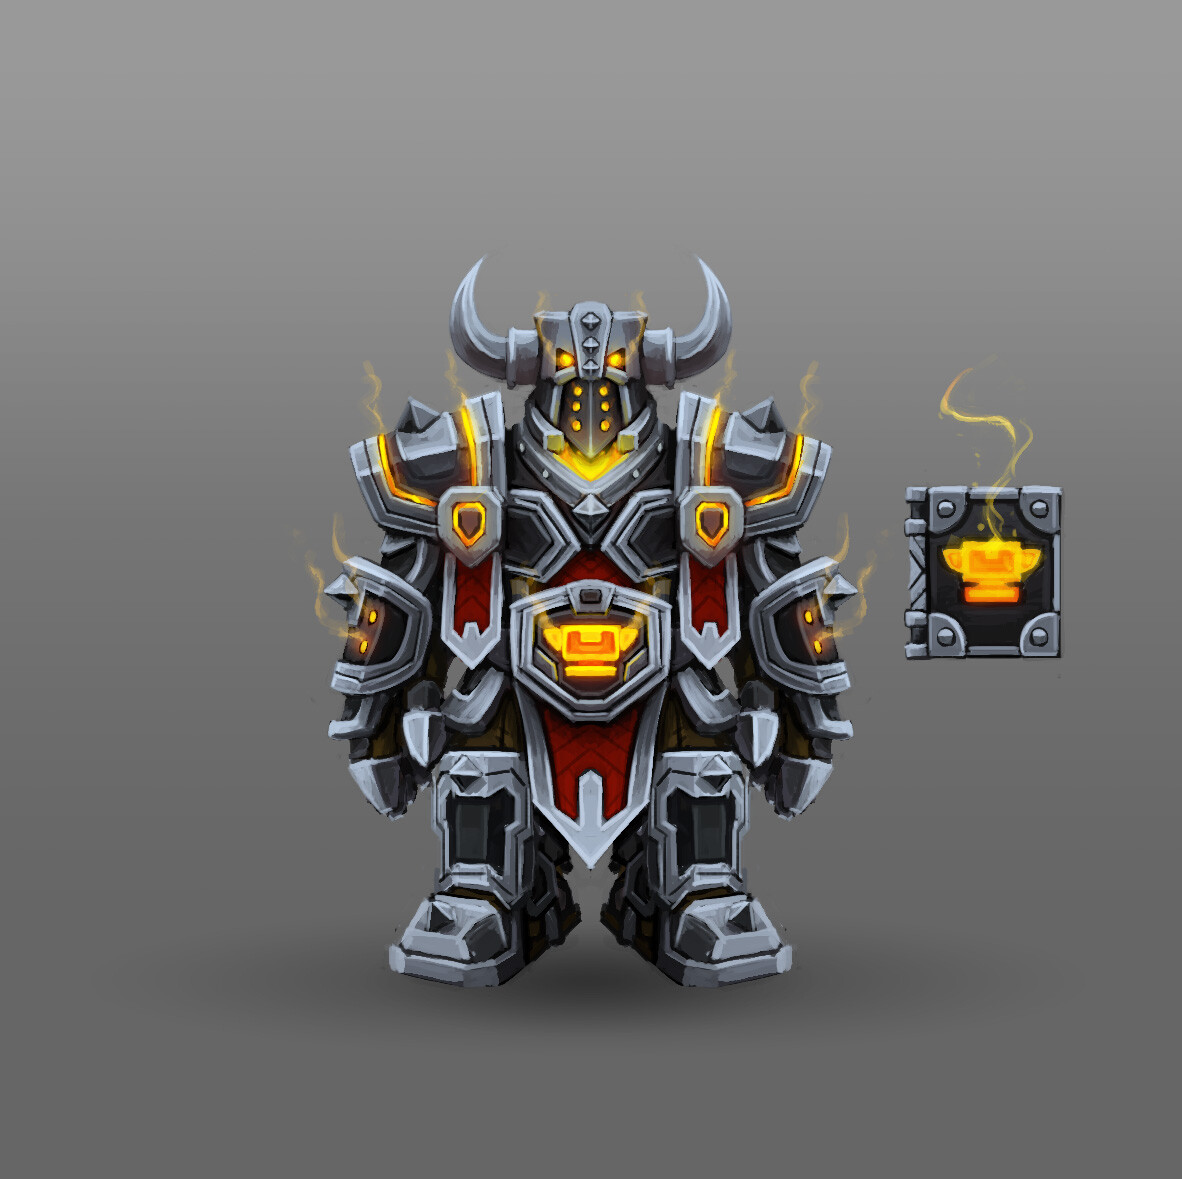 Paladin

The set is meant to along with the Dark Iron Paladin mount. As the Dark Irons are a more darker/sinister race, I want its design to be more threatening.

On the back he would have the libram hanging from his belt. 